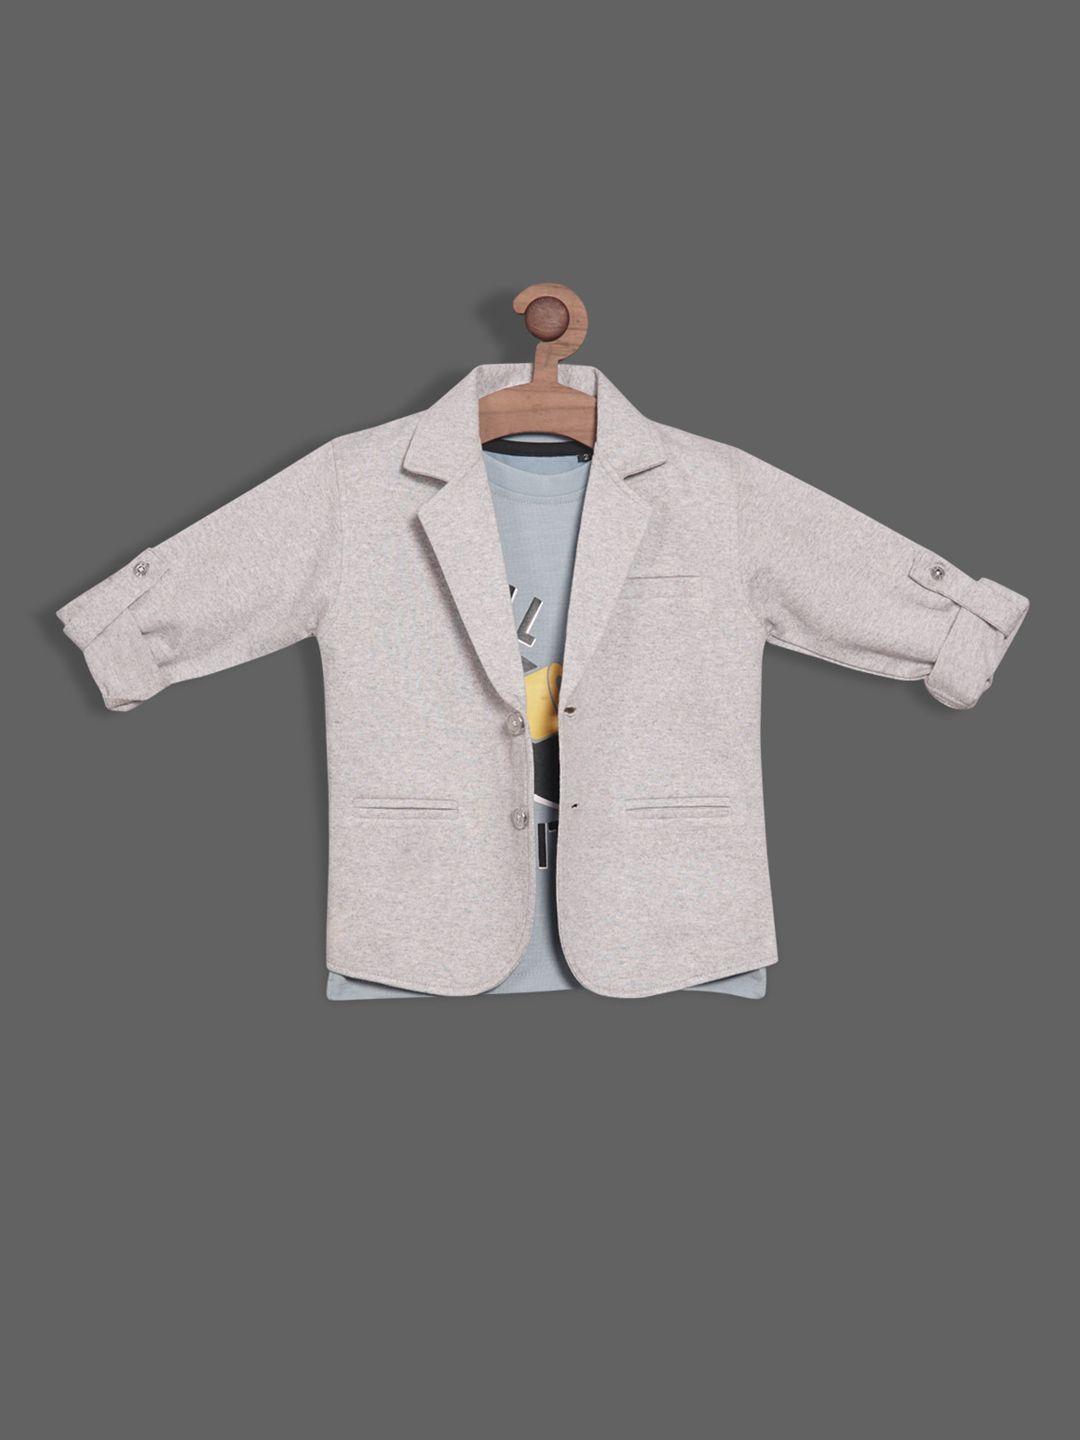 RIKIDOOS Boys Single-Breasted Cotton Light Weight Blazer With Printed T-Shirt